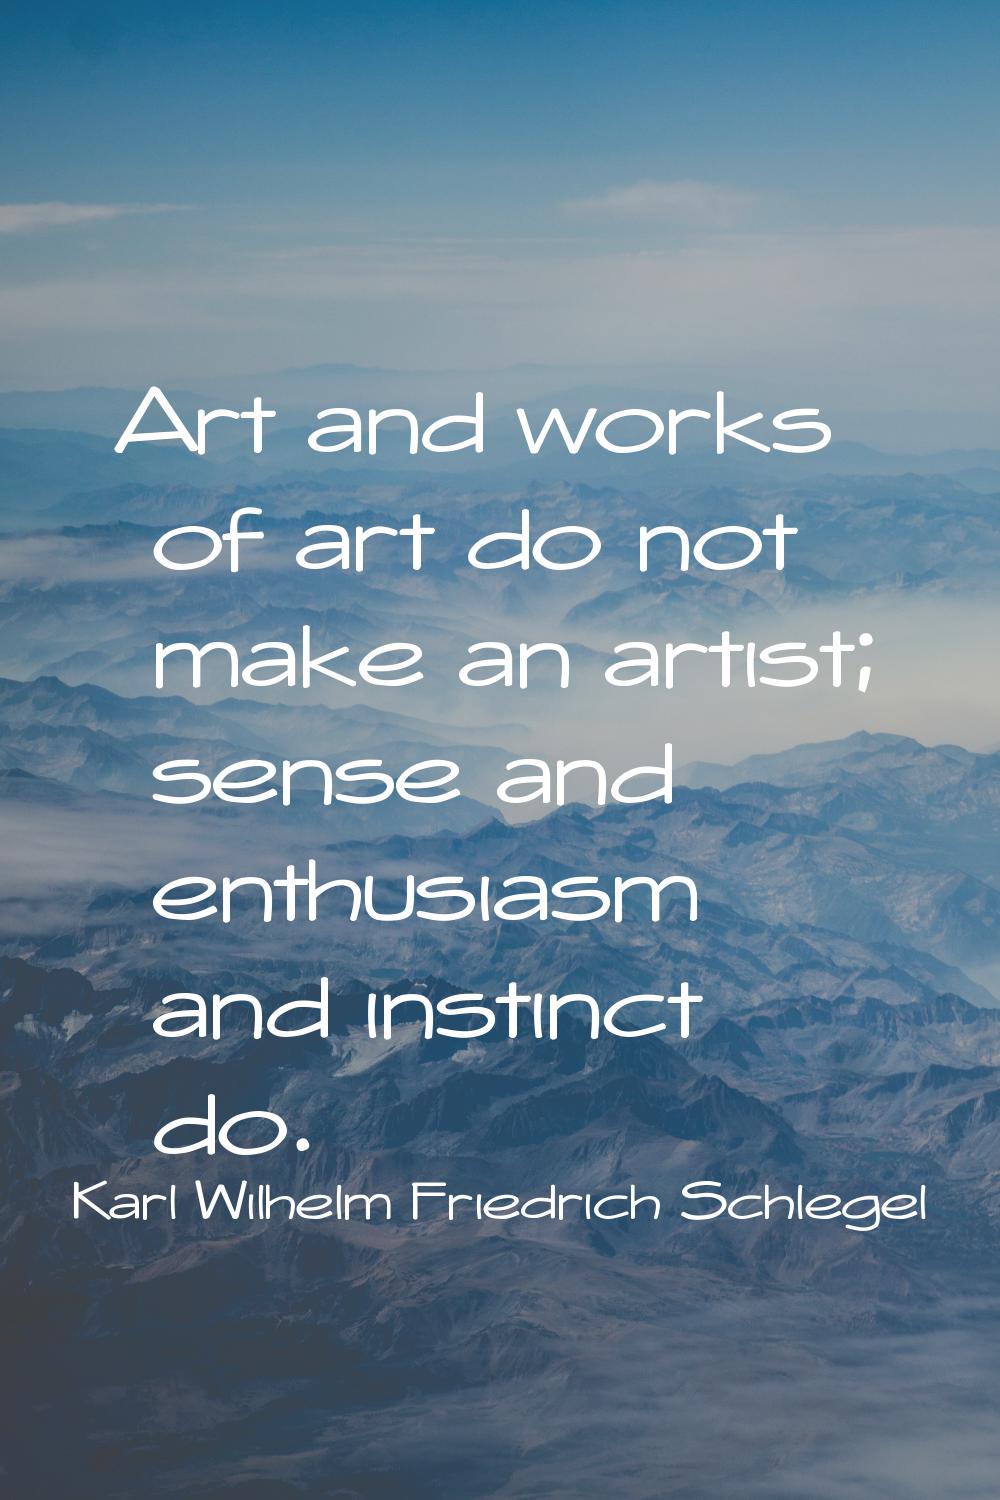 Art and works of art do not make an artist; sense and enthusiasm and instinct do.